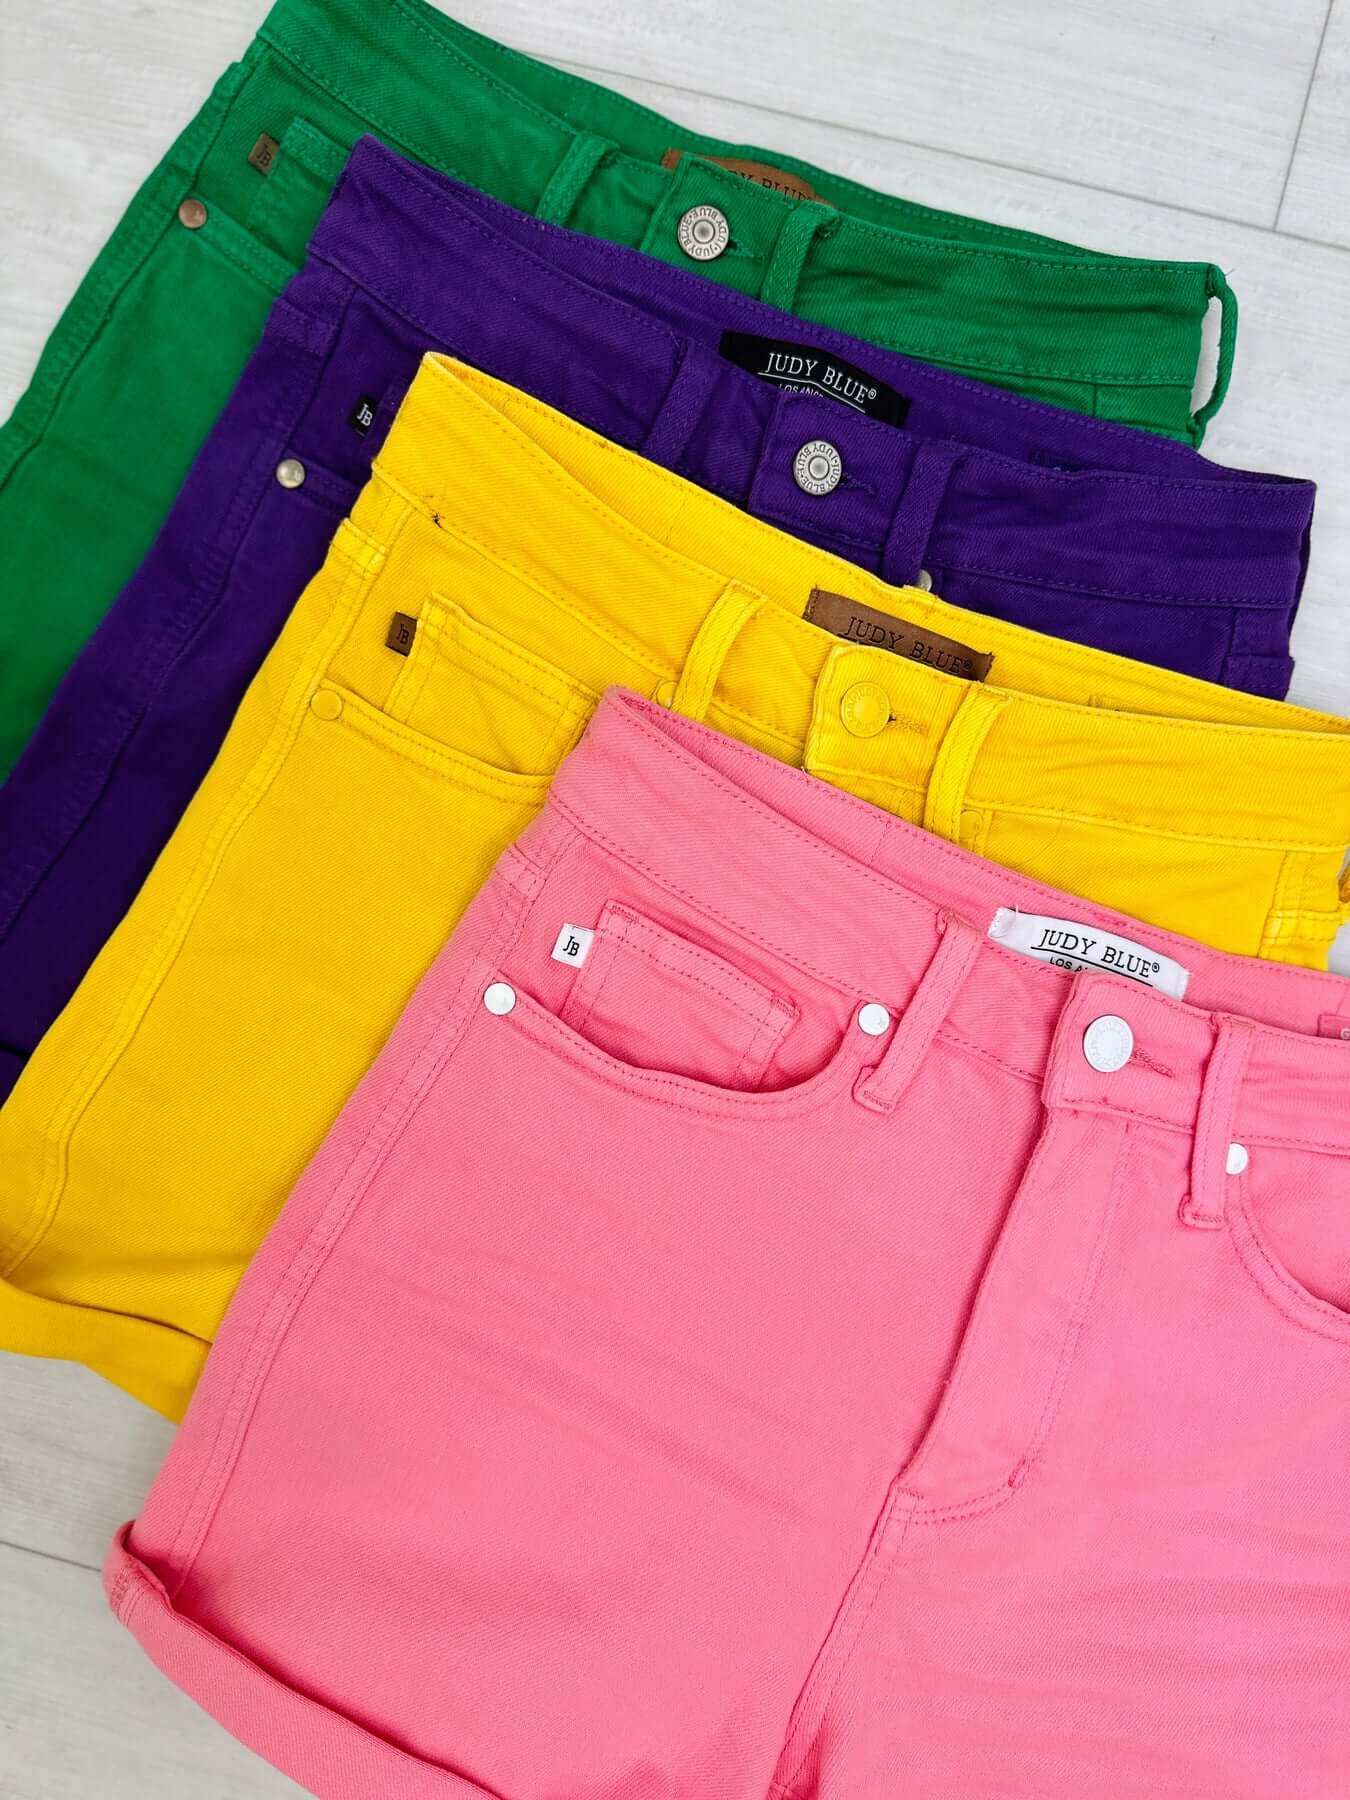 Judy Blue Jenna High Rise Control Top Shorts in pink, yellow, purple, green. on sale now at follower of faith apparel. Christian faith based apparel and we carry judy blue jeans and shorts shop now